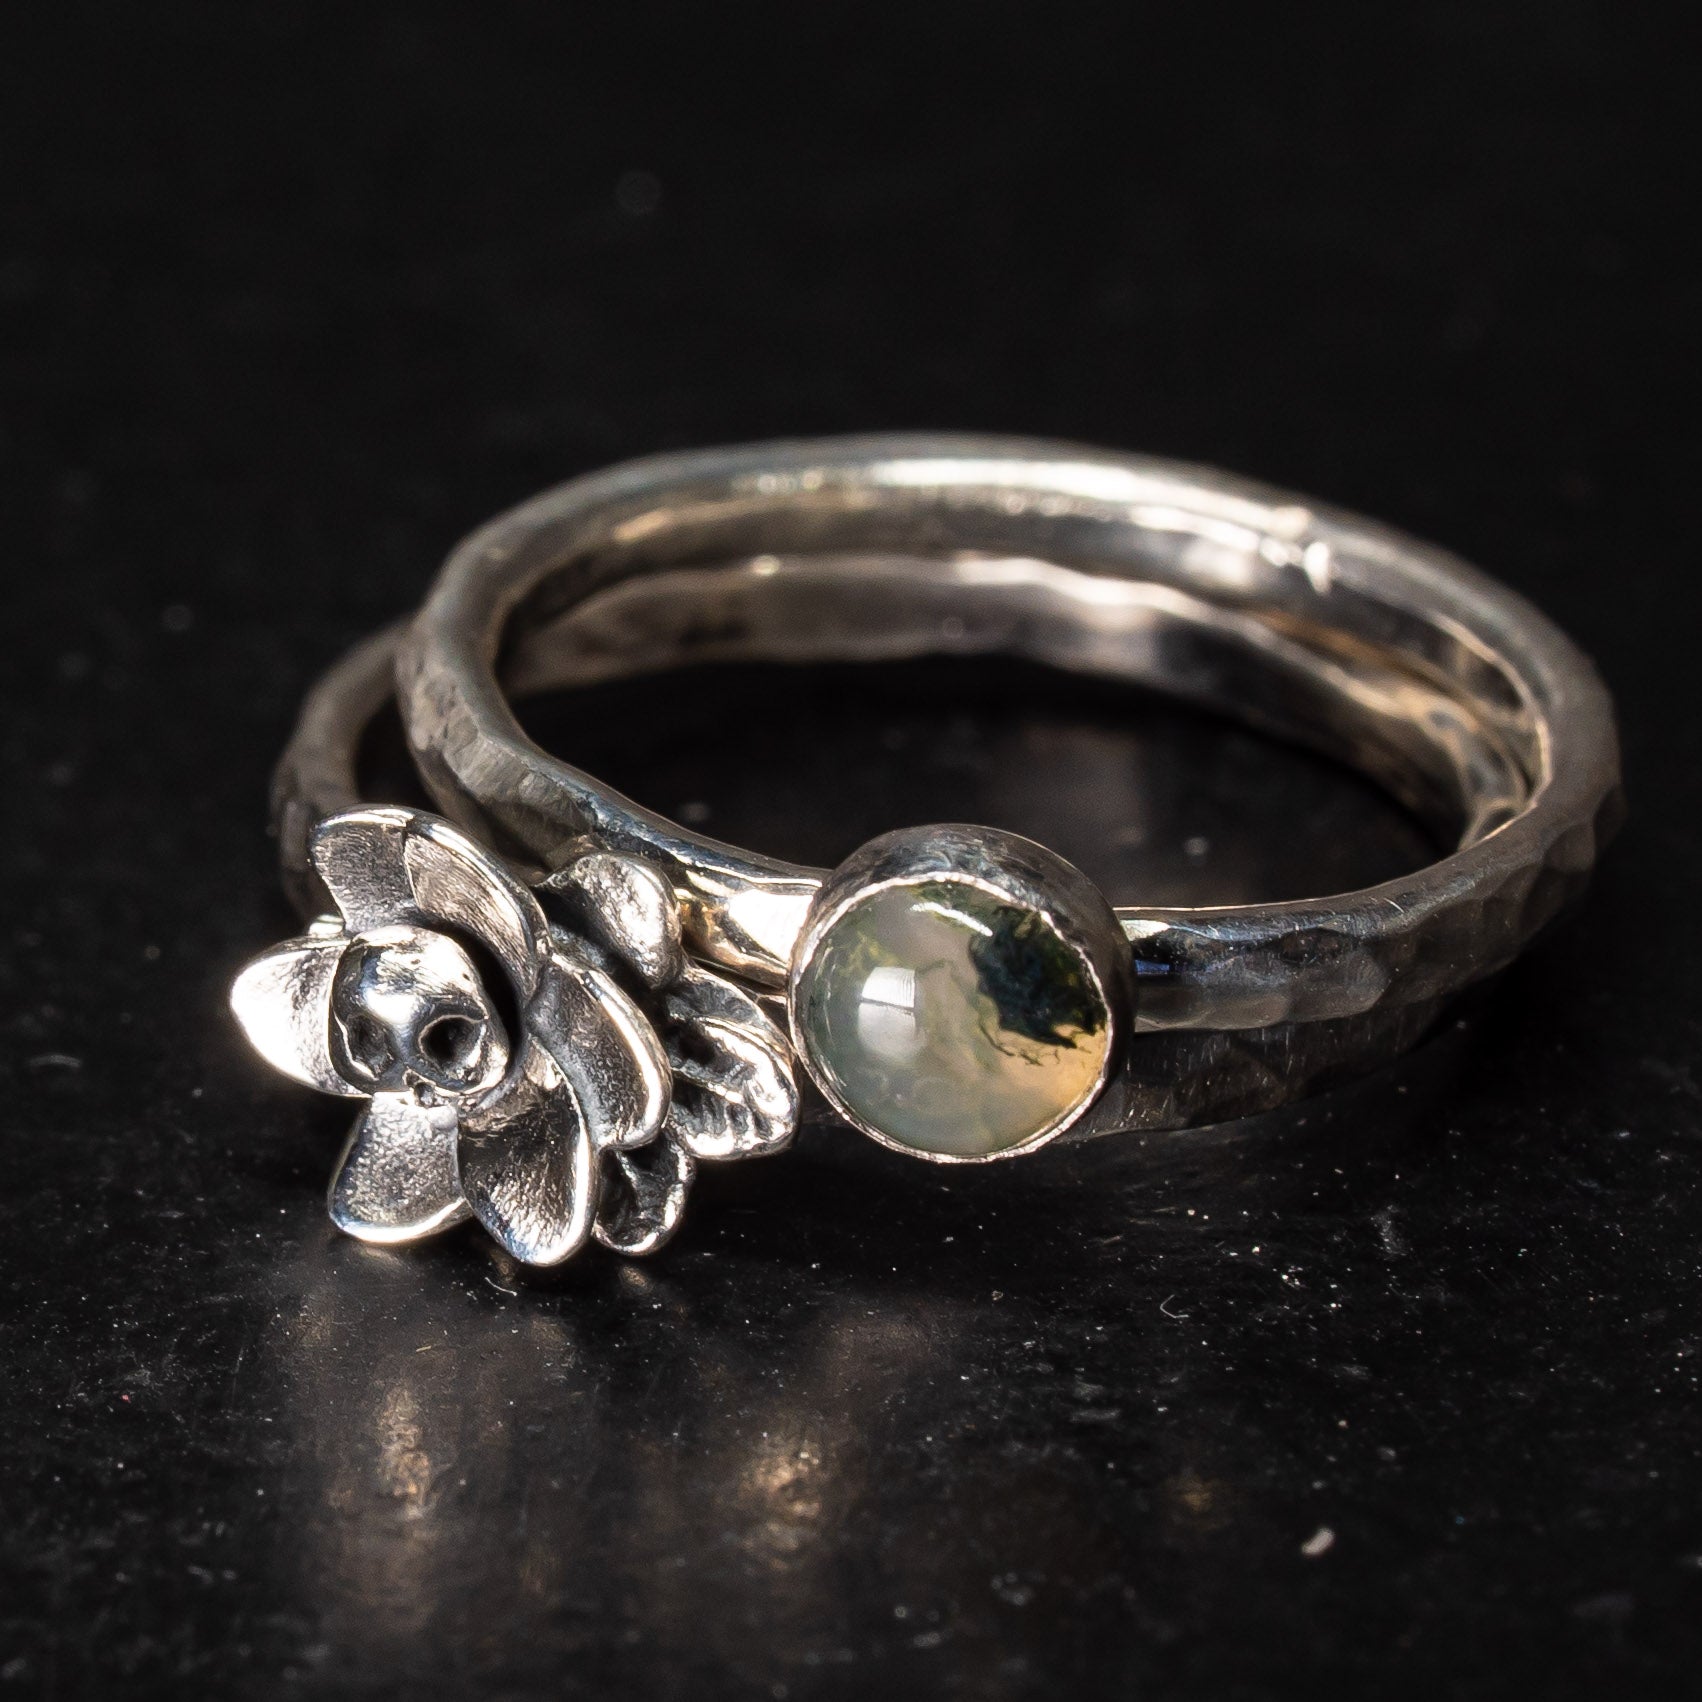 witchy stacking rings with moss agate and belladonna plant detail